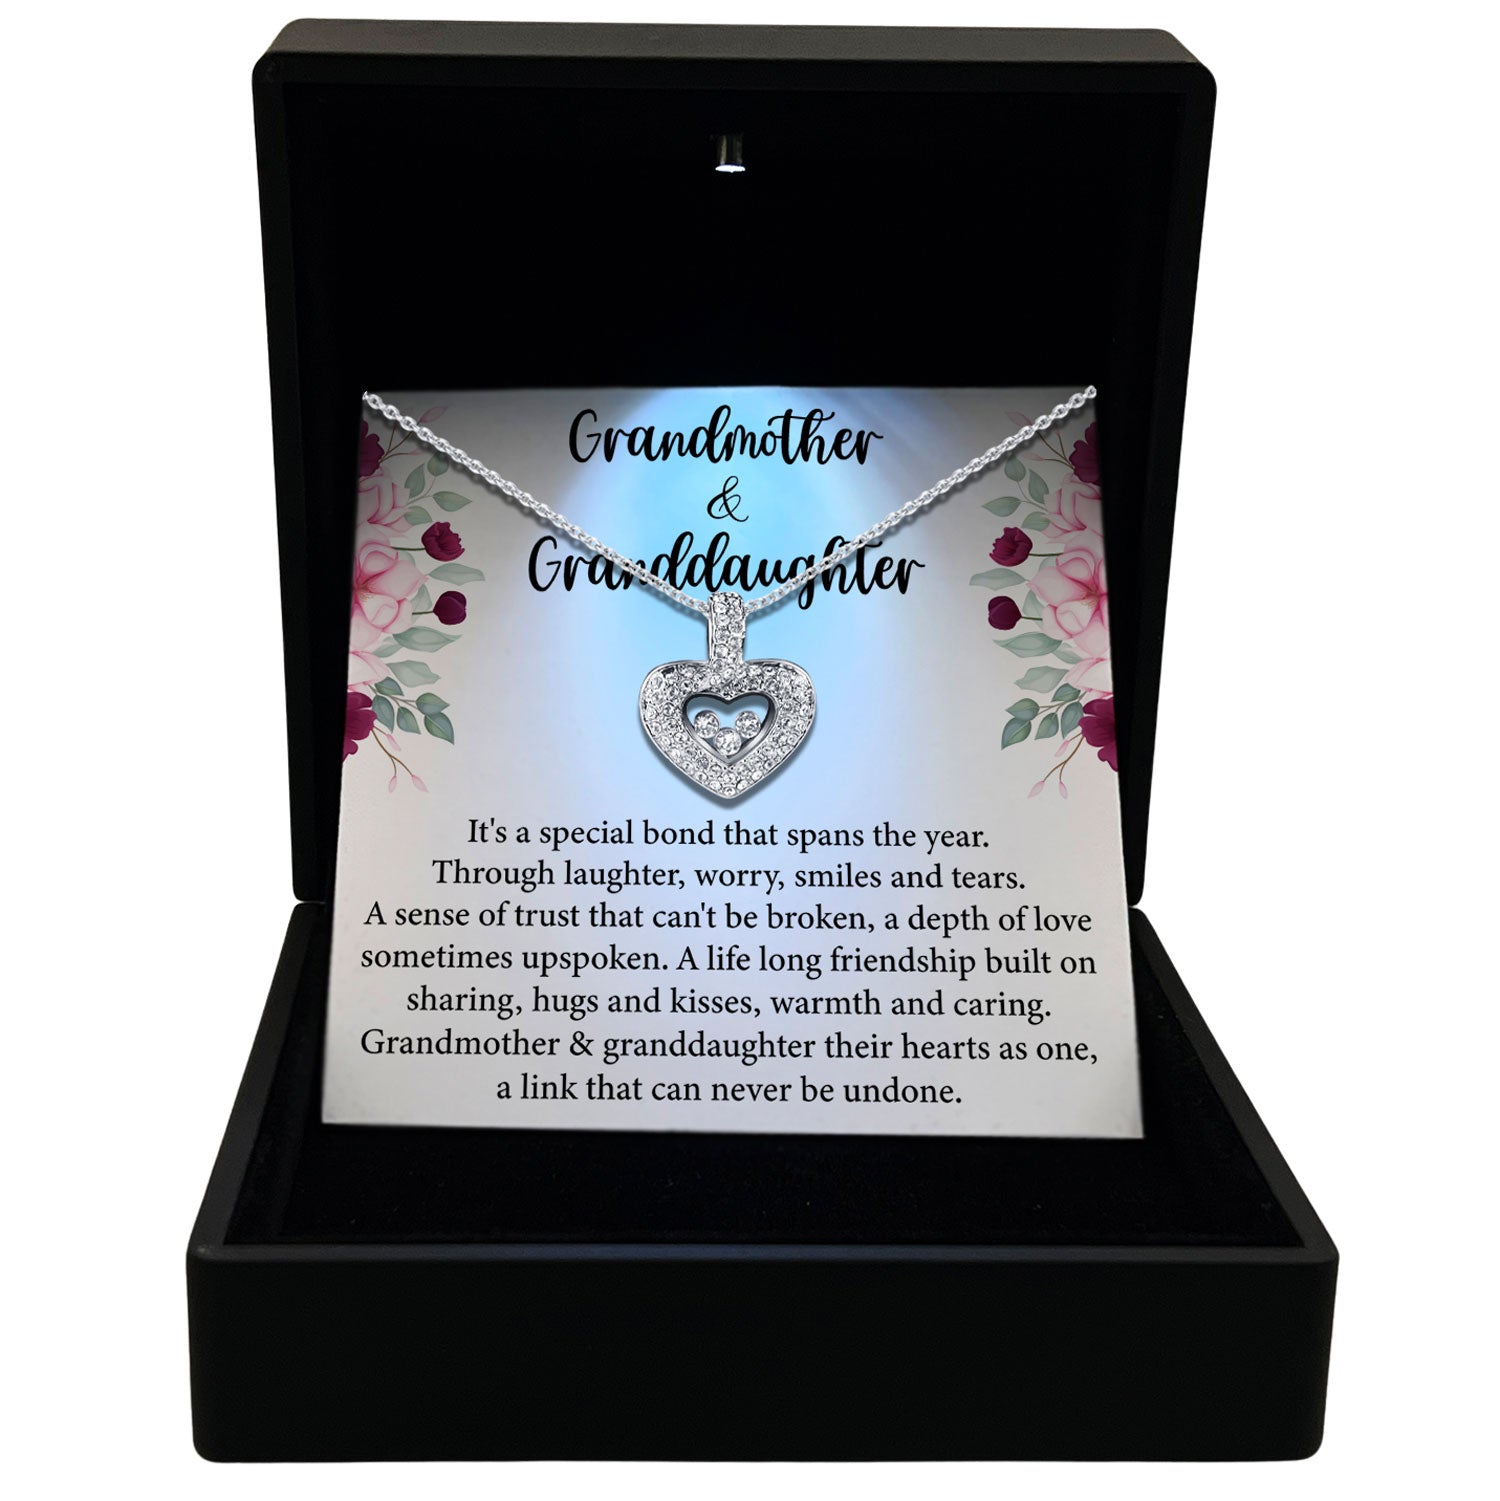 TRYNDI™ To My Grandma Floating Heart Necklace With Authentic Swarovski Crystals